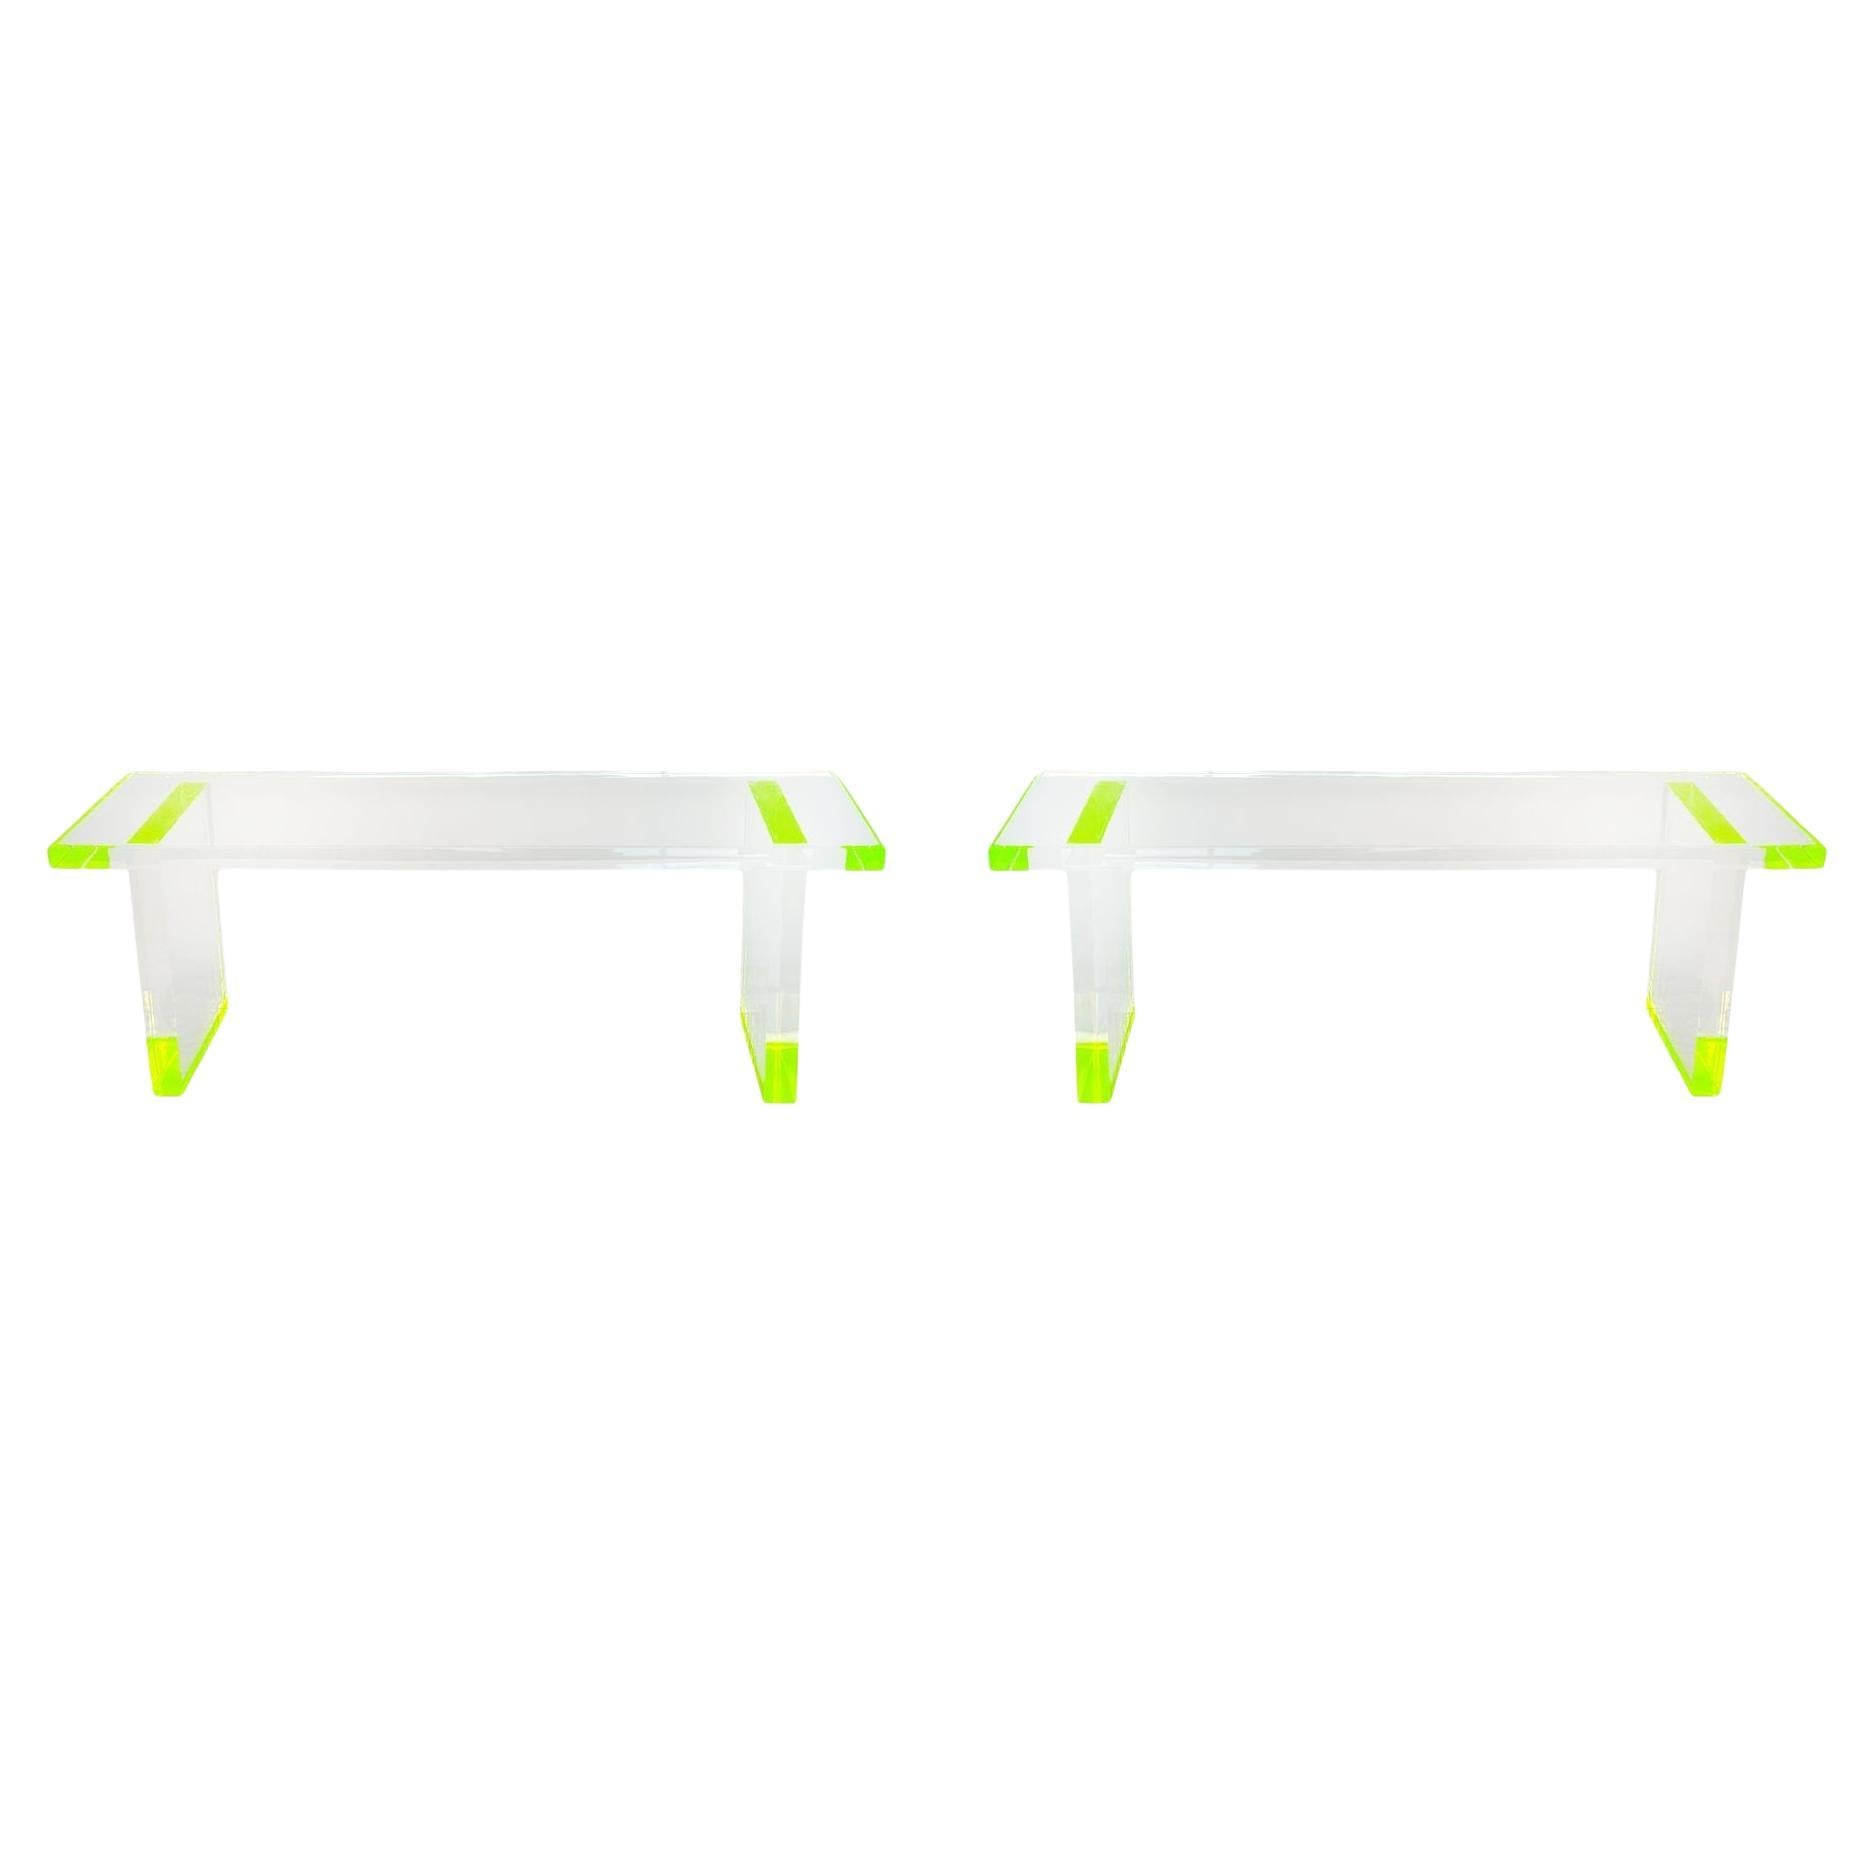 Pair of Modern Lucite Benches w/ Fluorescent Green Details by Pegaso Gallery For Sale